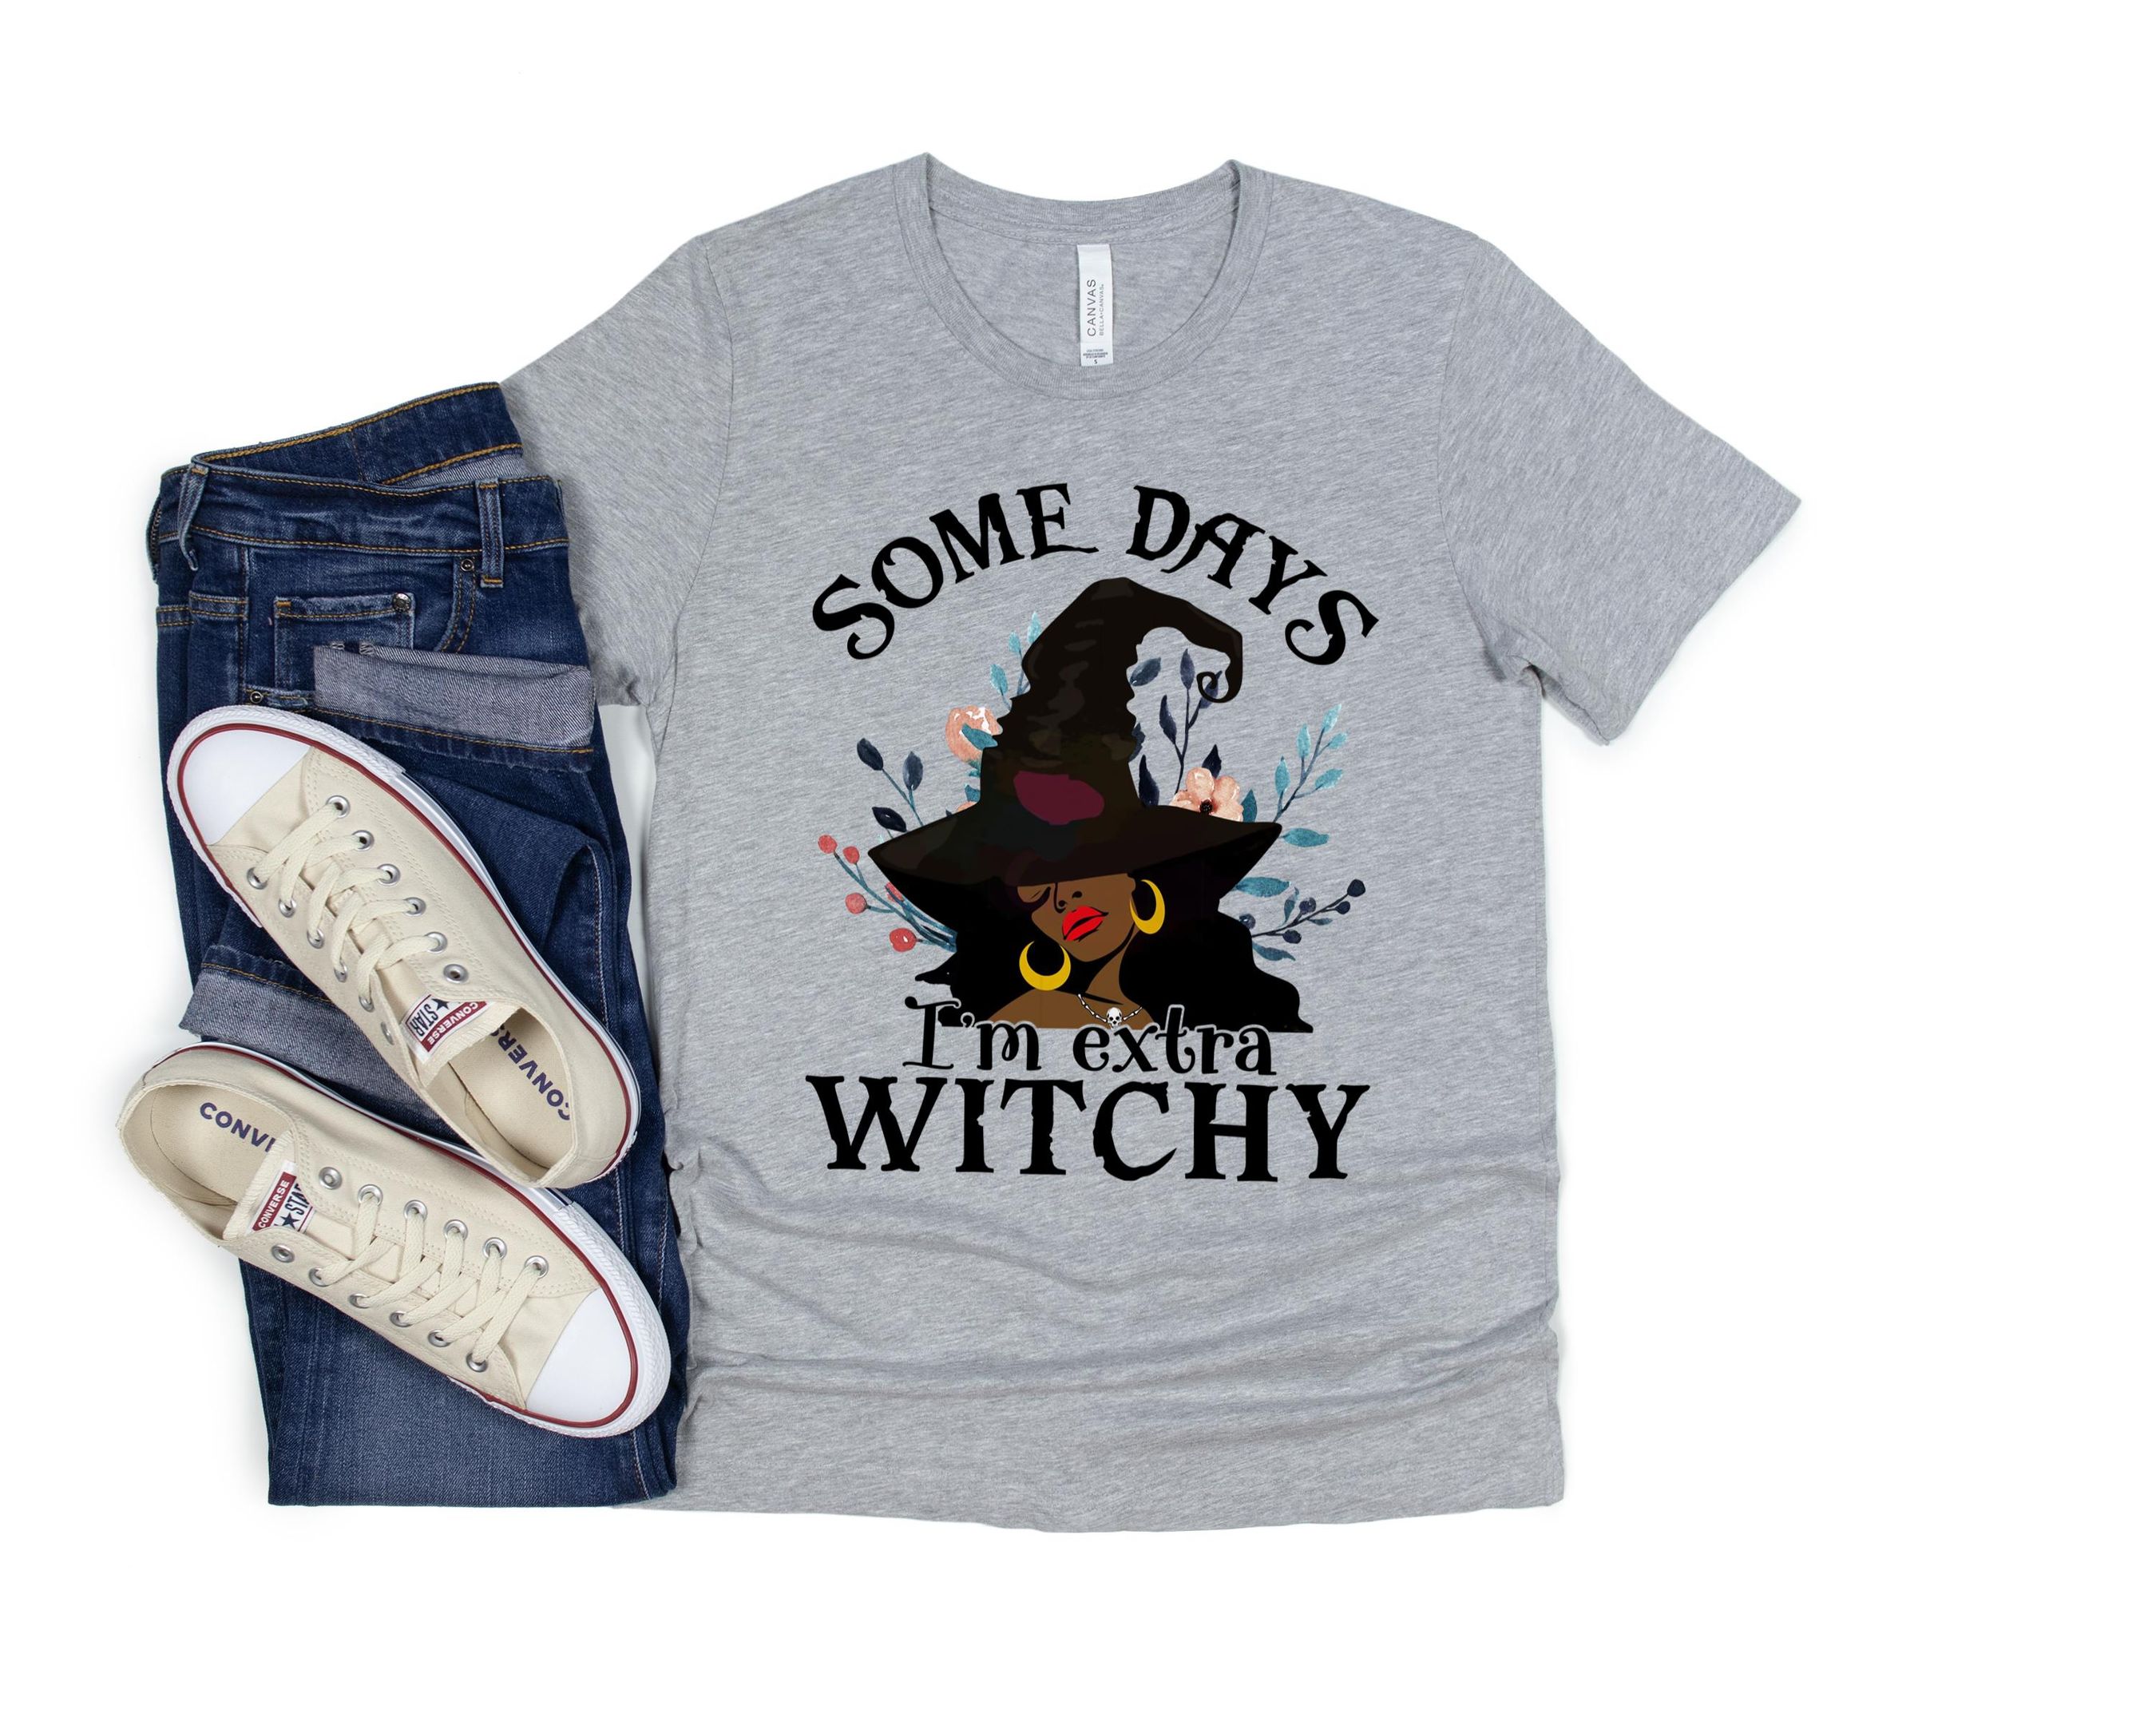 Some Day I’M Extra Witchy Shirt, Melenin Witch Shirt, Afro Witch Shirt, Black Woman Shirt